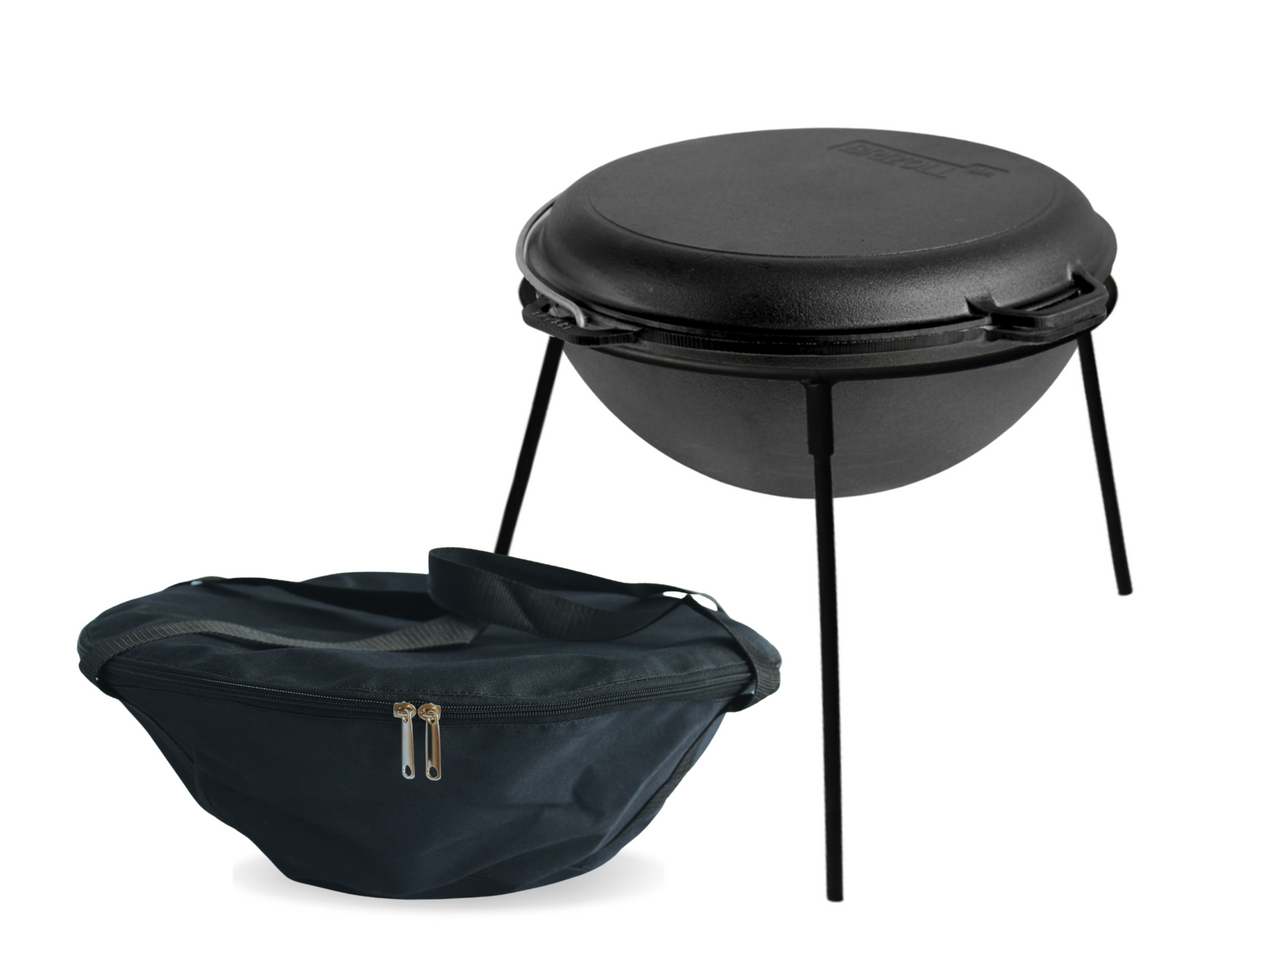 Cast iron asian cauldron 15 L WITH A GRILL LID-FRYING PAN, a bag and a stand